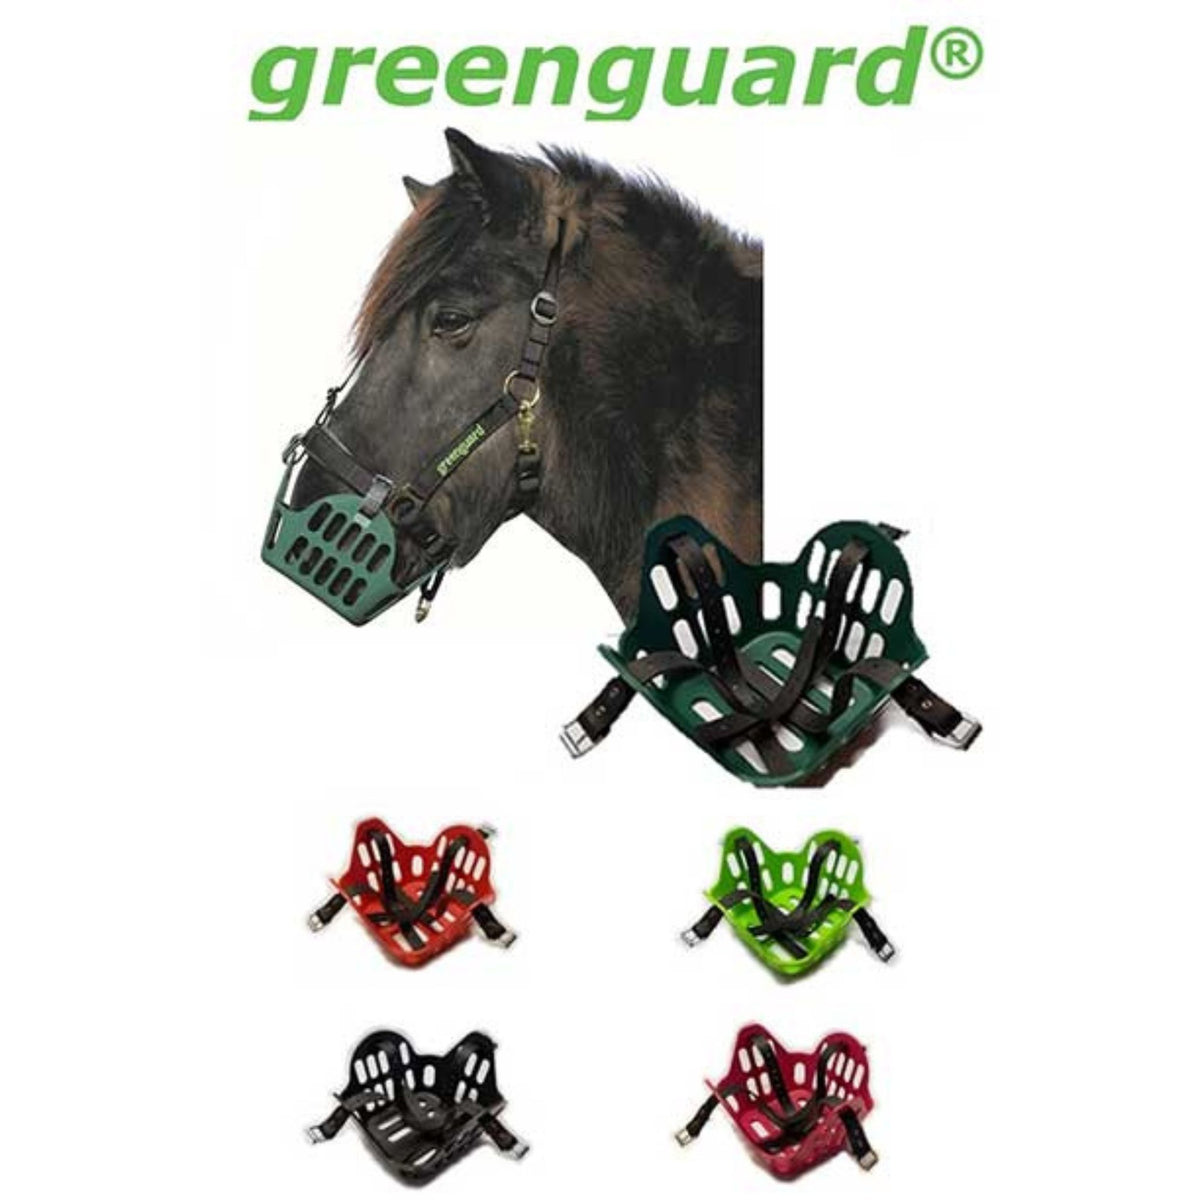 Shetland pony wearing Greenguard muzzle with others shown below.